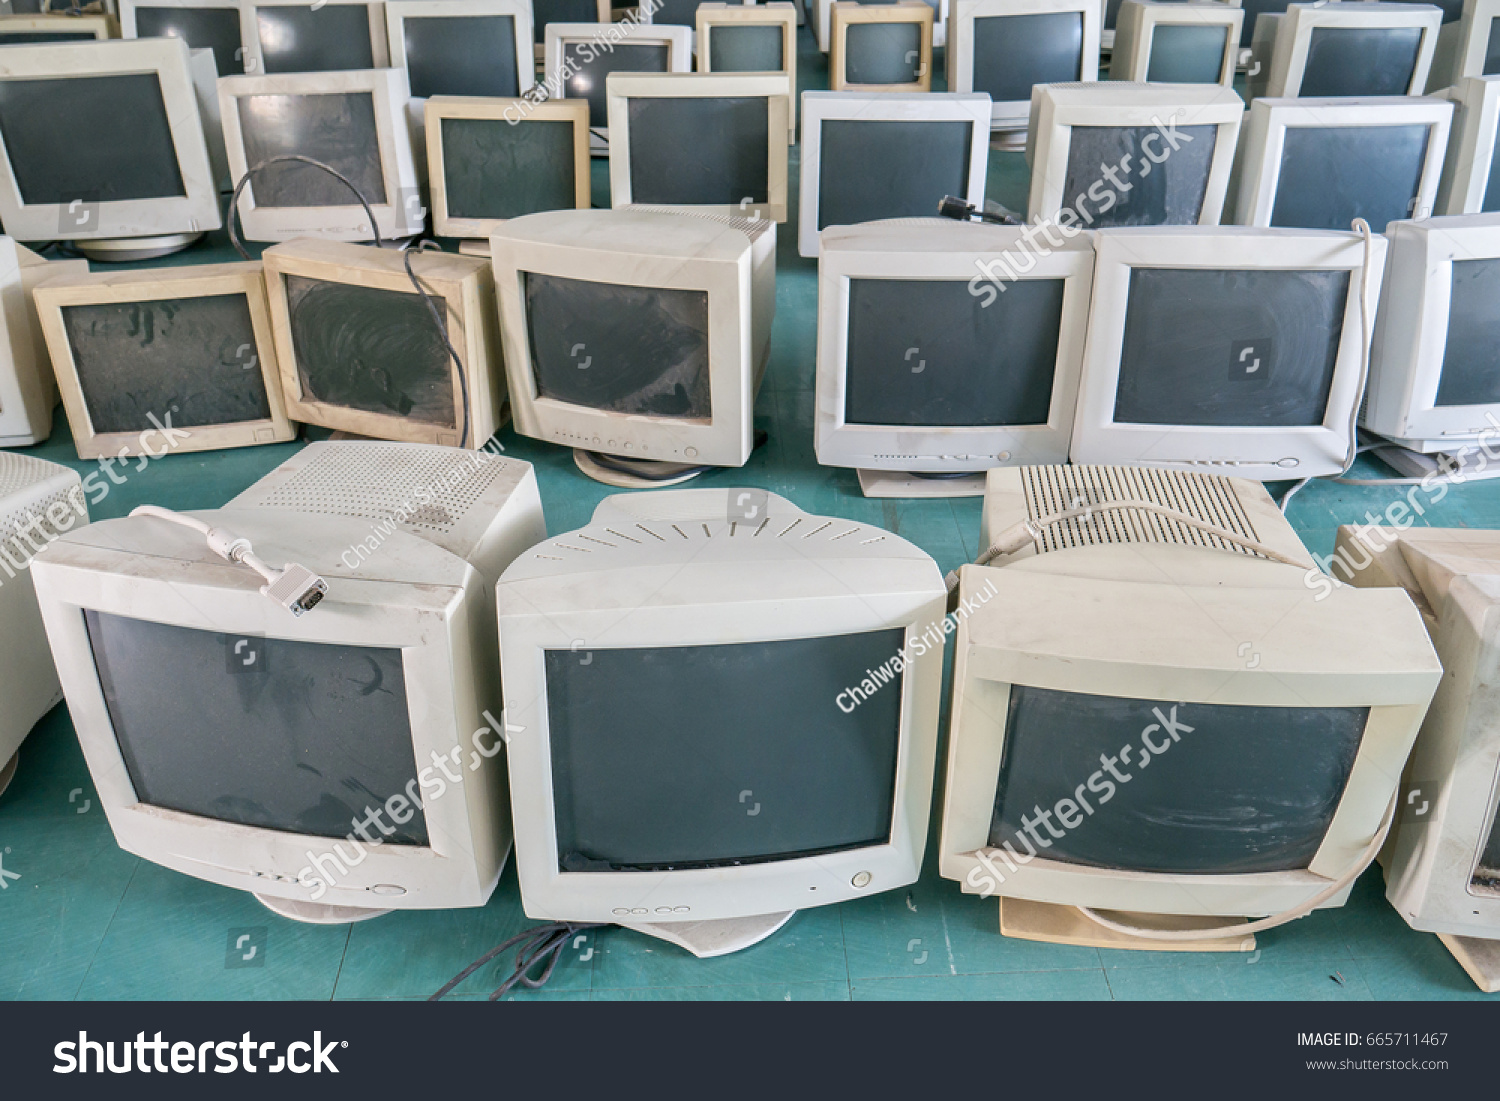 Old Crt Monitor Stock Photo Shutterstock